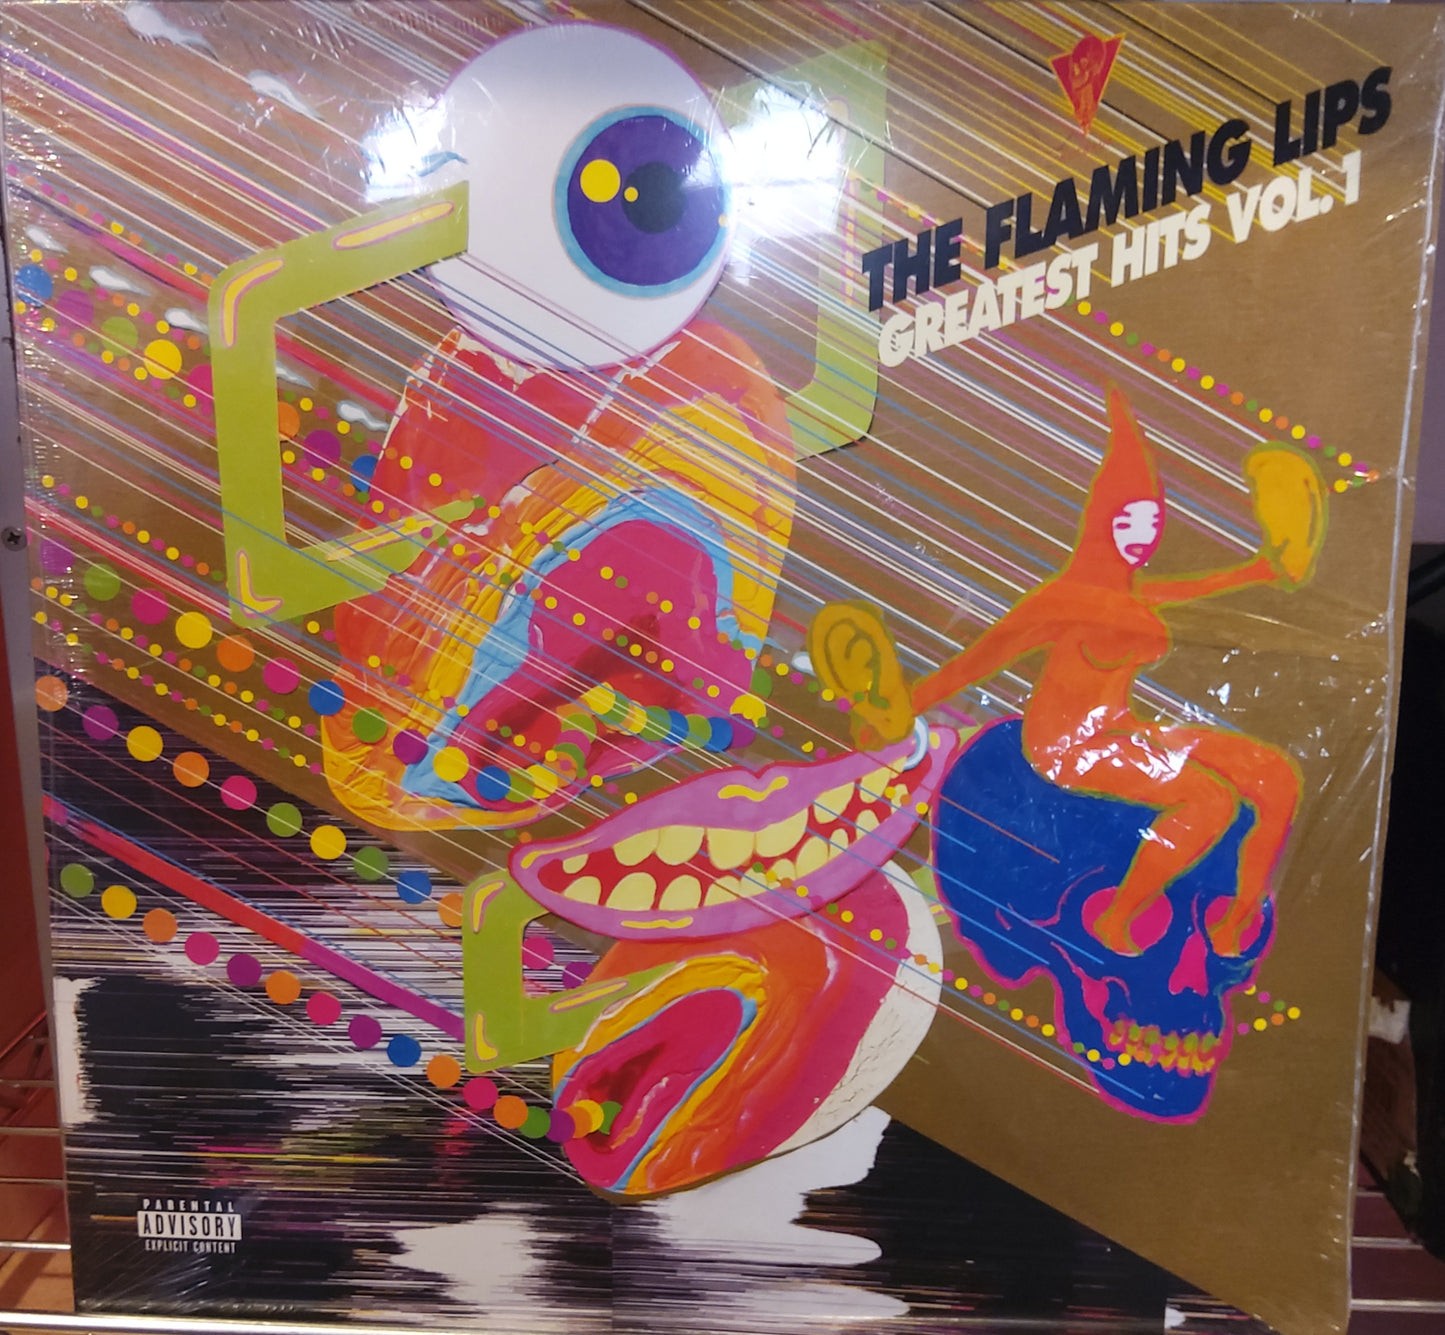 The Flaming Lips, Greatest Hits Vol. (Sealed, Vinyl)